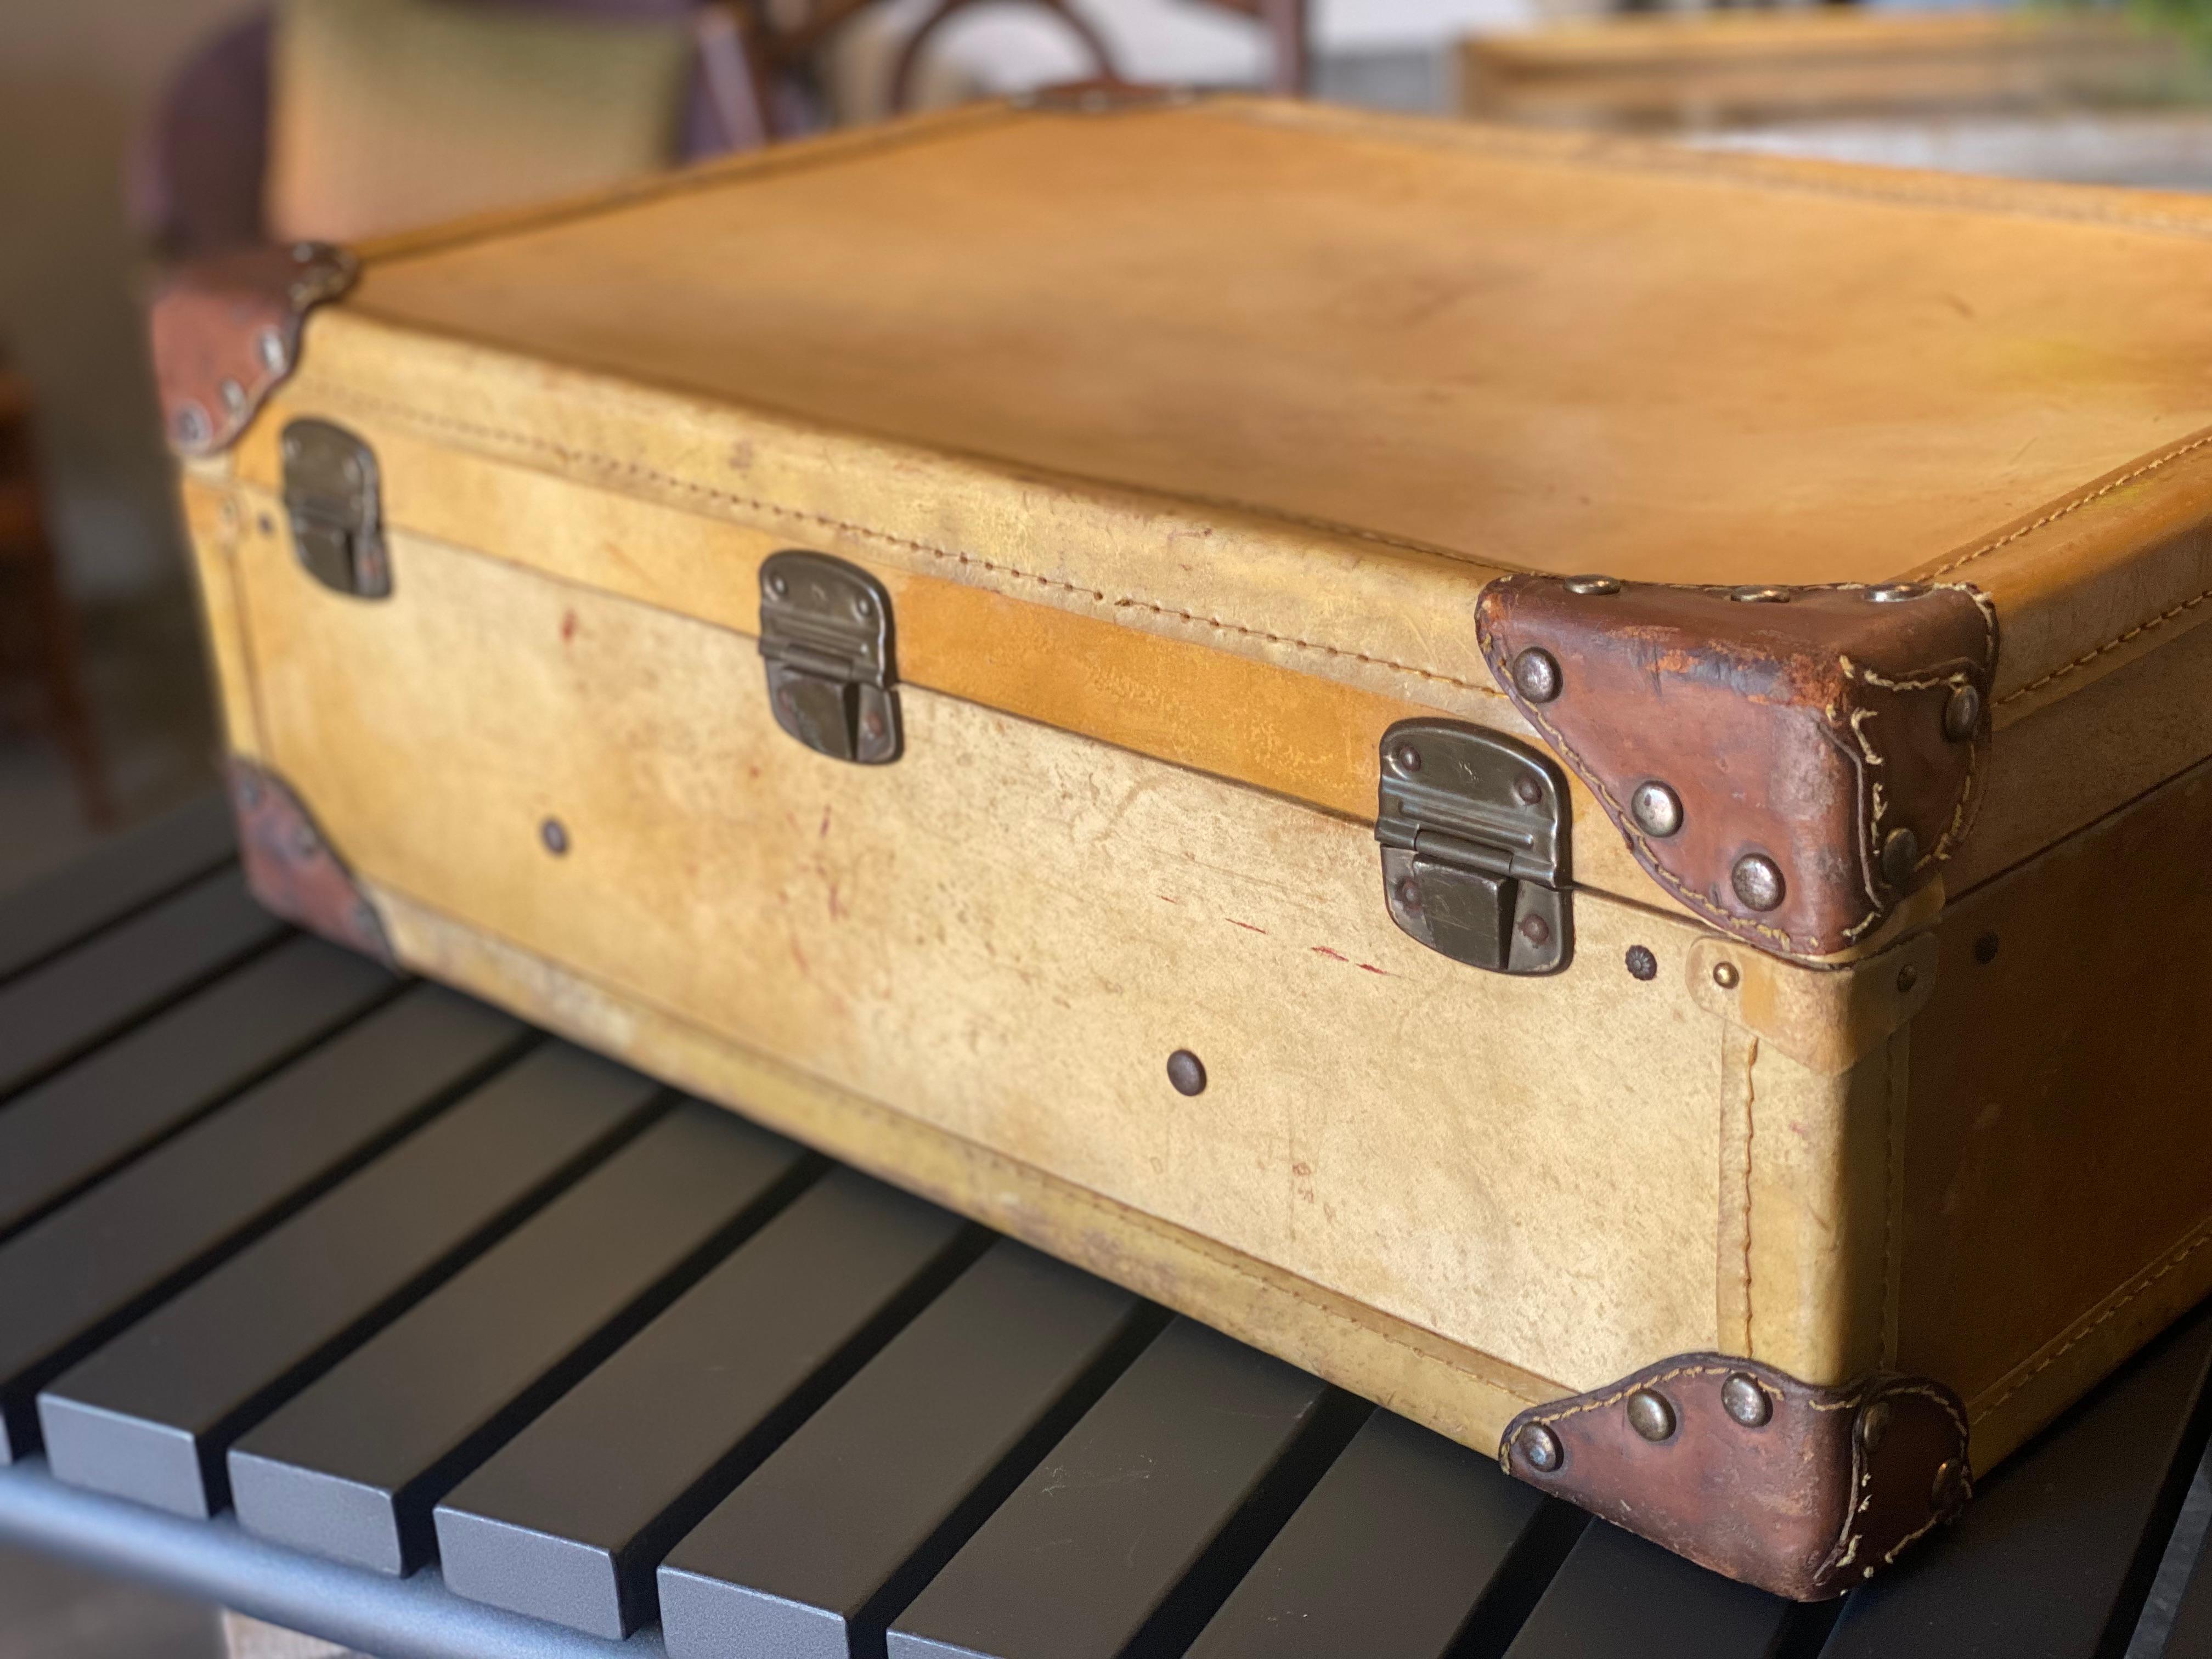 Luxurious Art Deco Suitcase Made of Light Vellum Leather / Parchment with Rivets For Sale 9